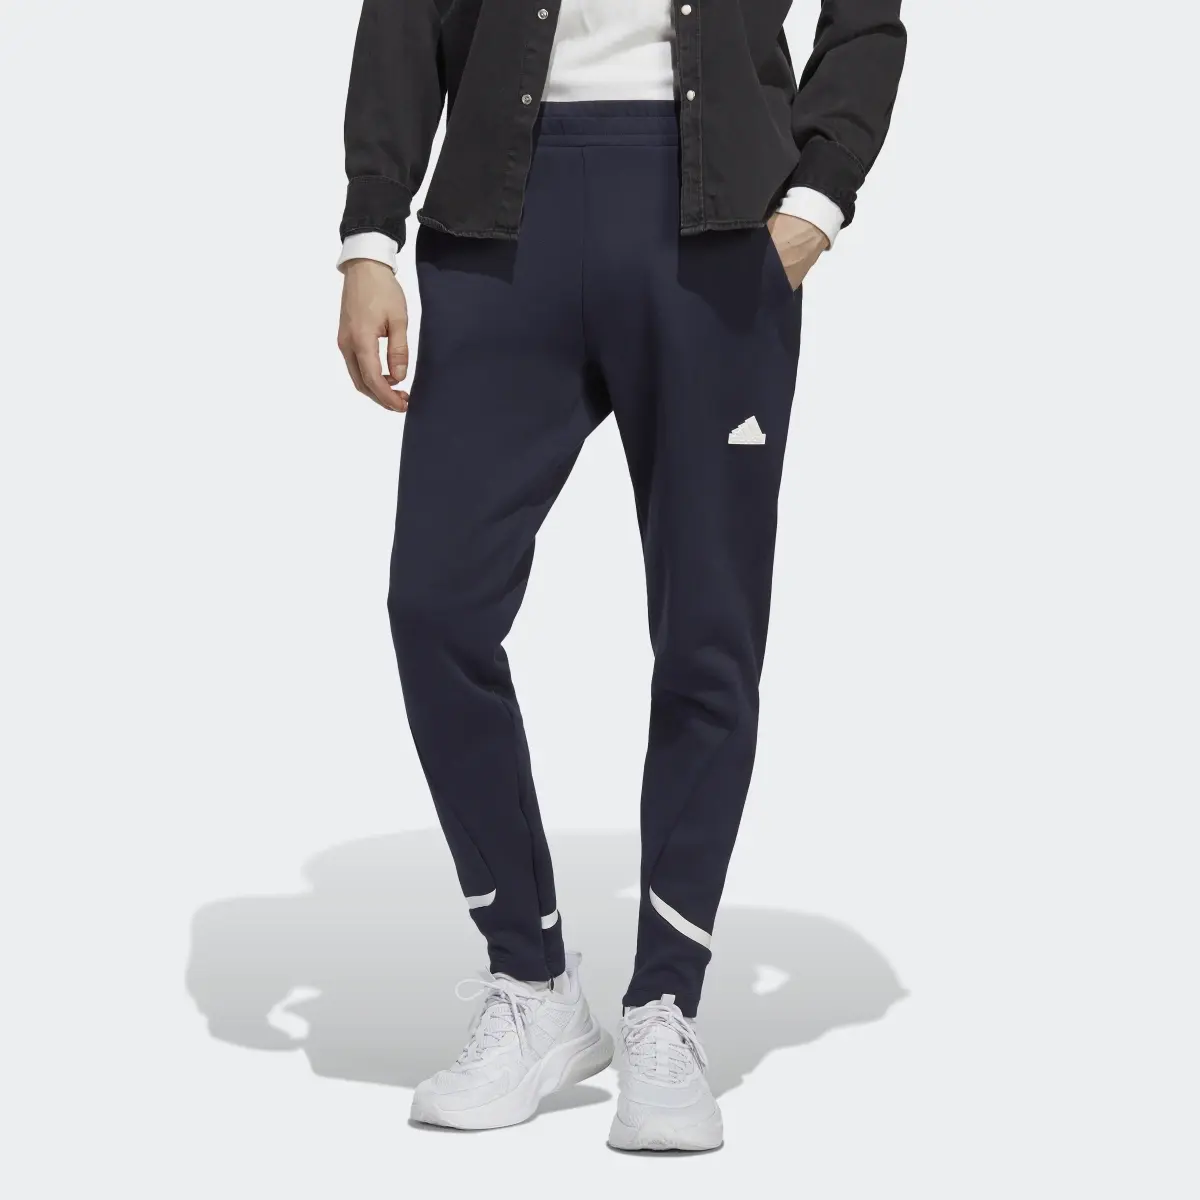 Adidas Designed for Gameday Pants. 1